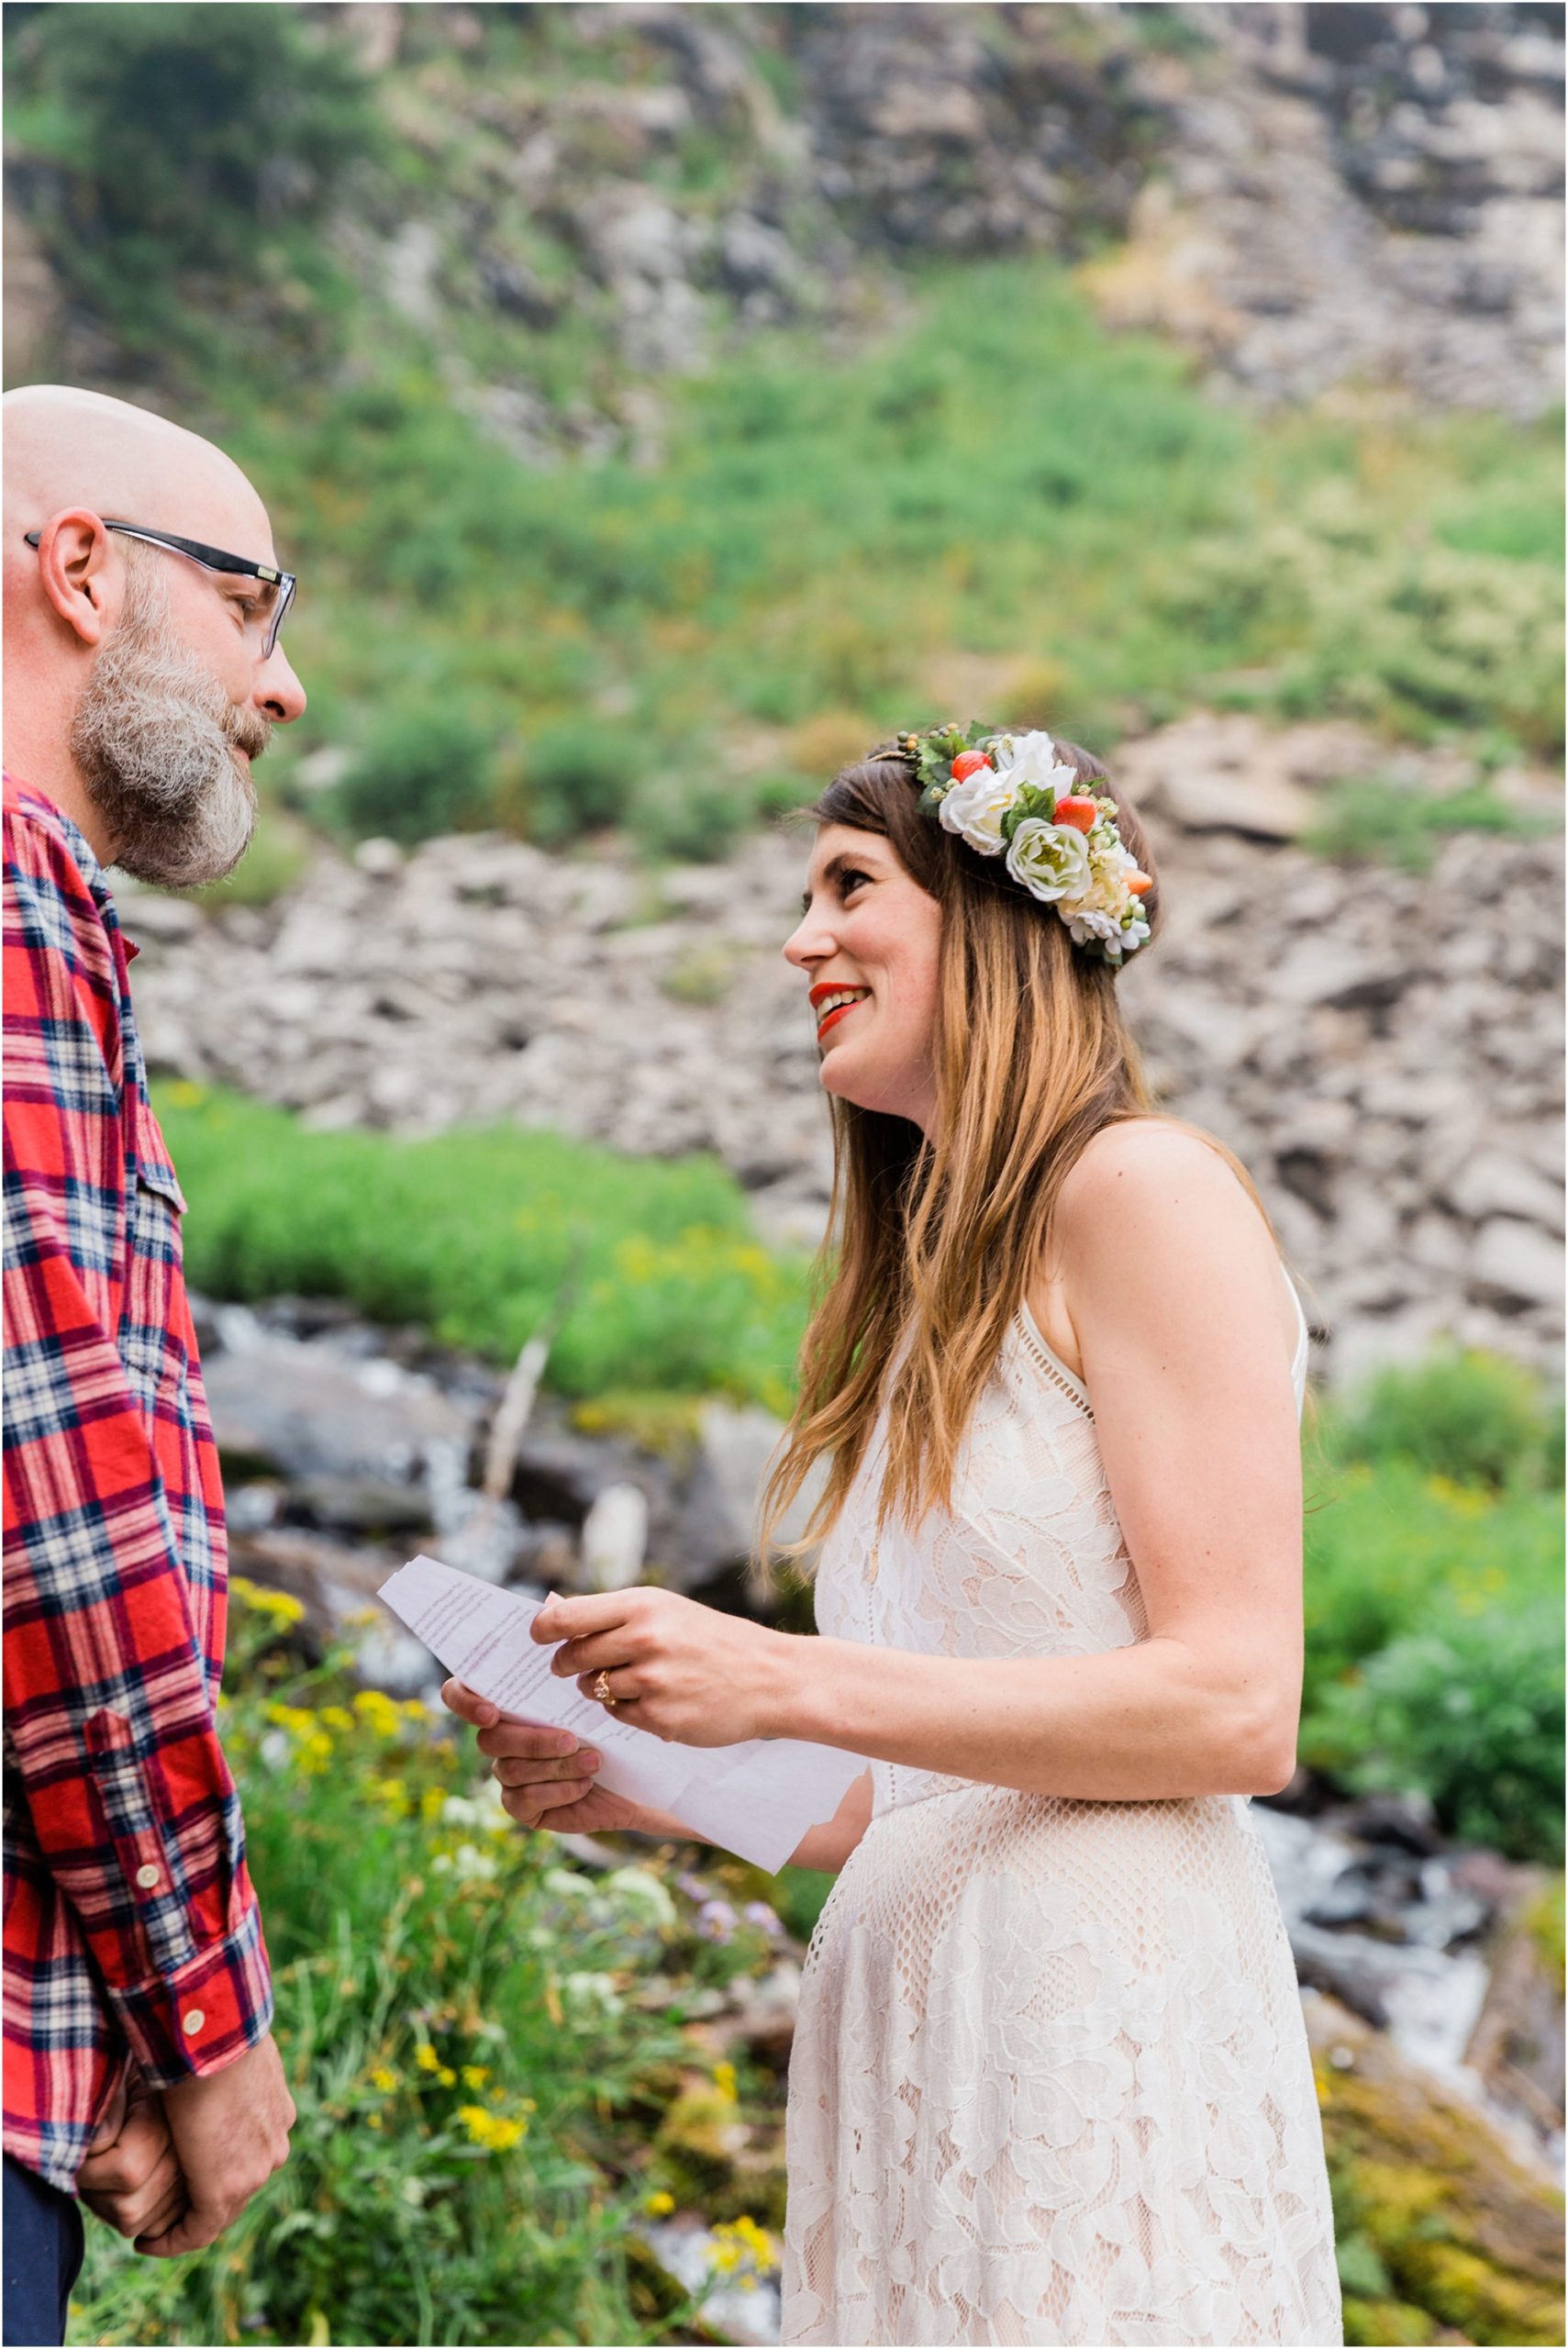 A gorgeous bohemian bride says her personal wedding vows during her Crater Lake Elopement in Oregon. | Erica Swantek Photography